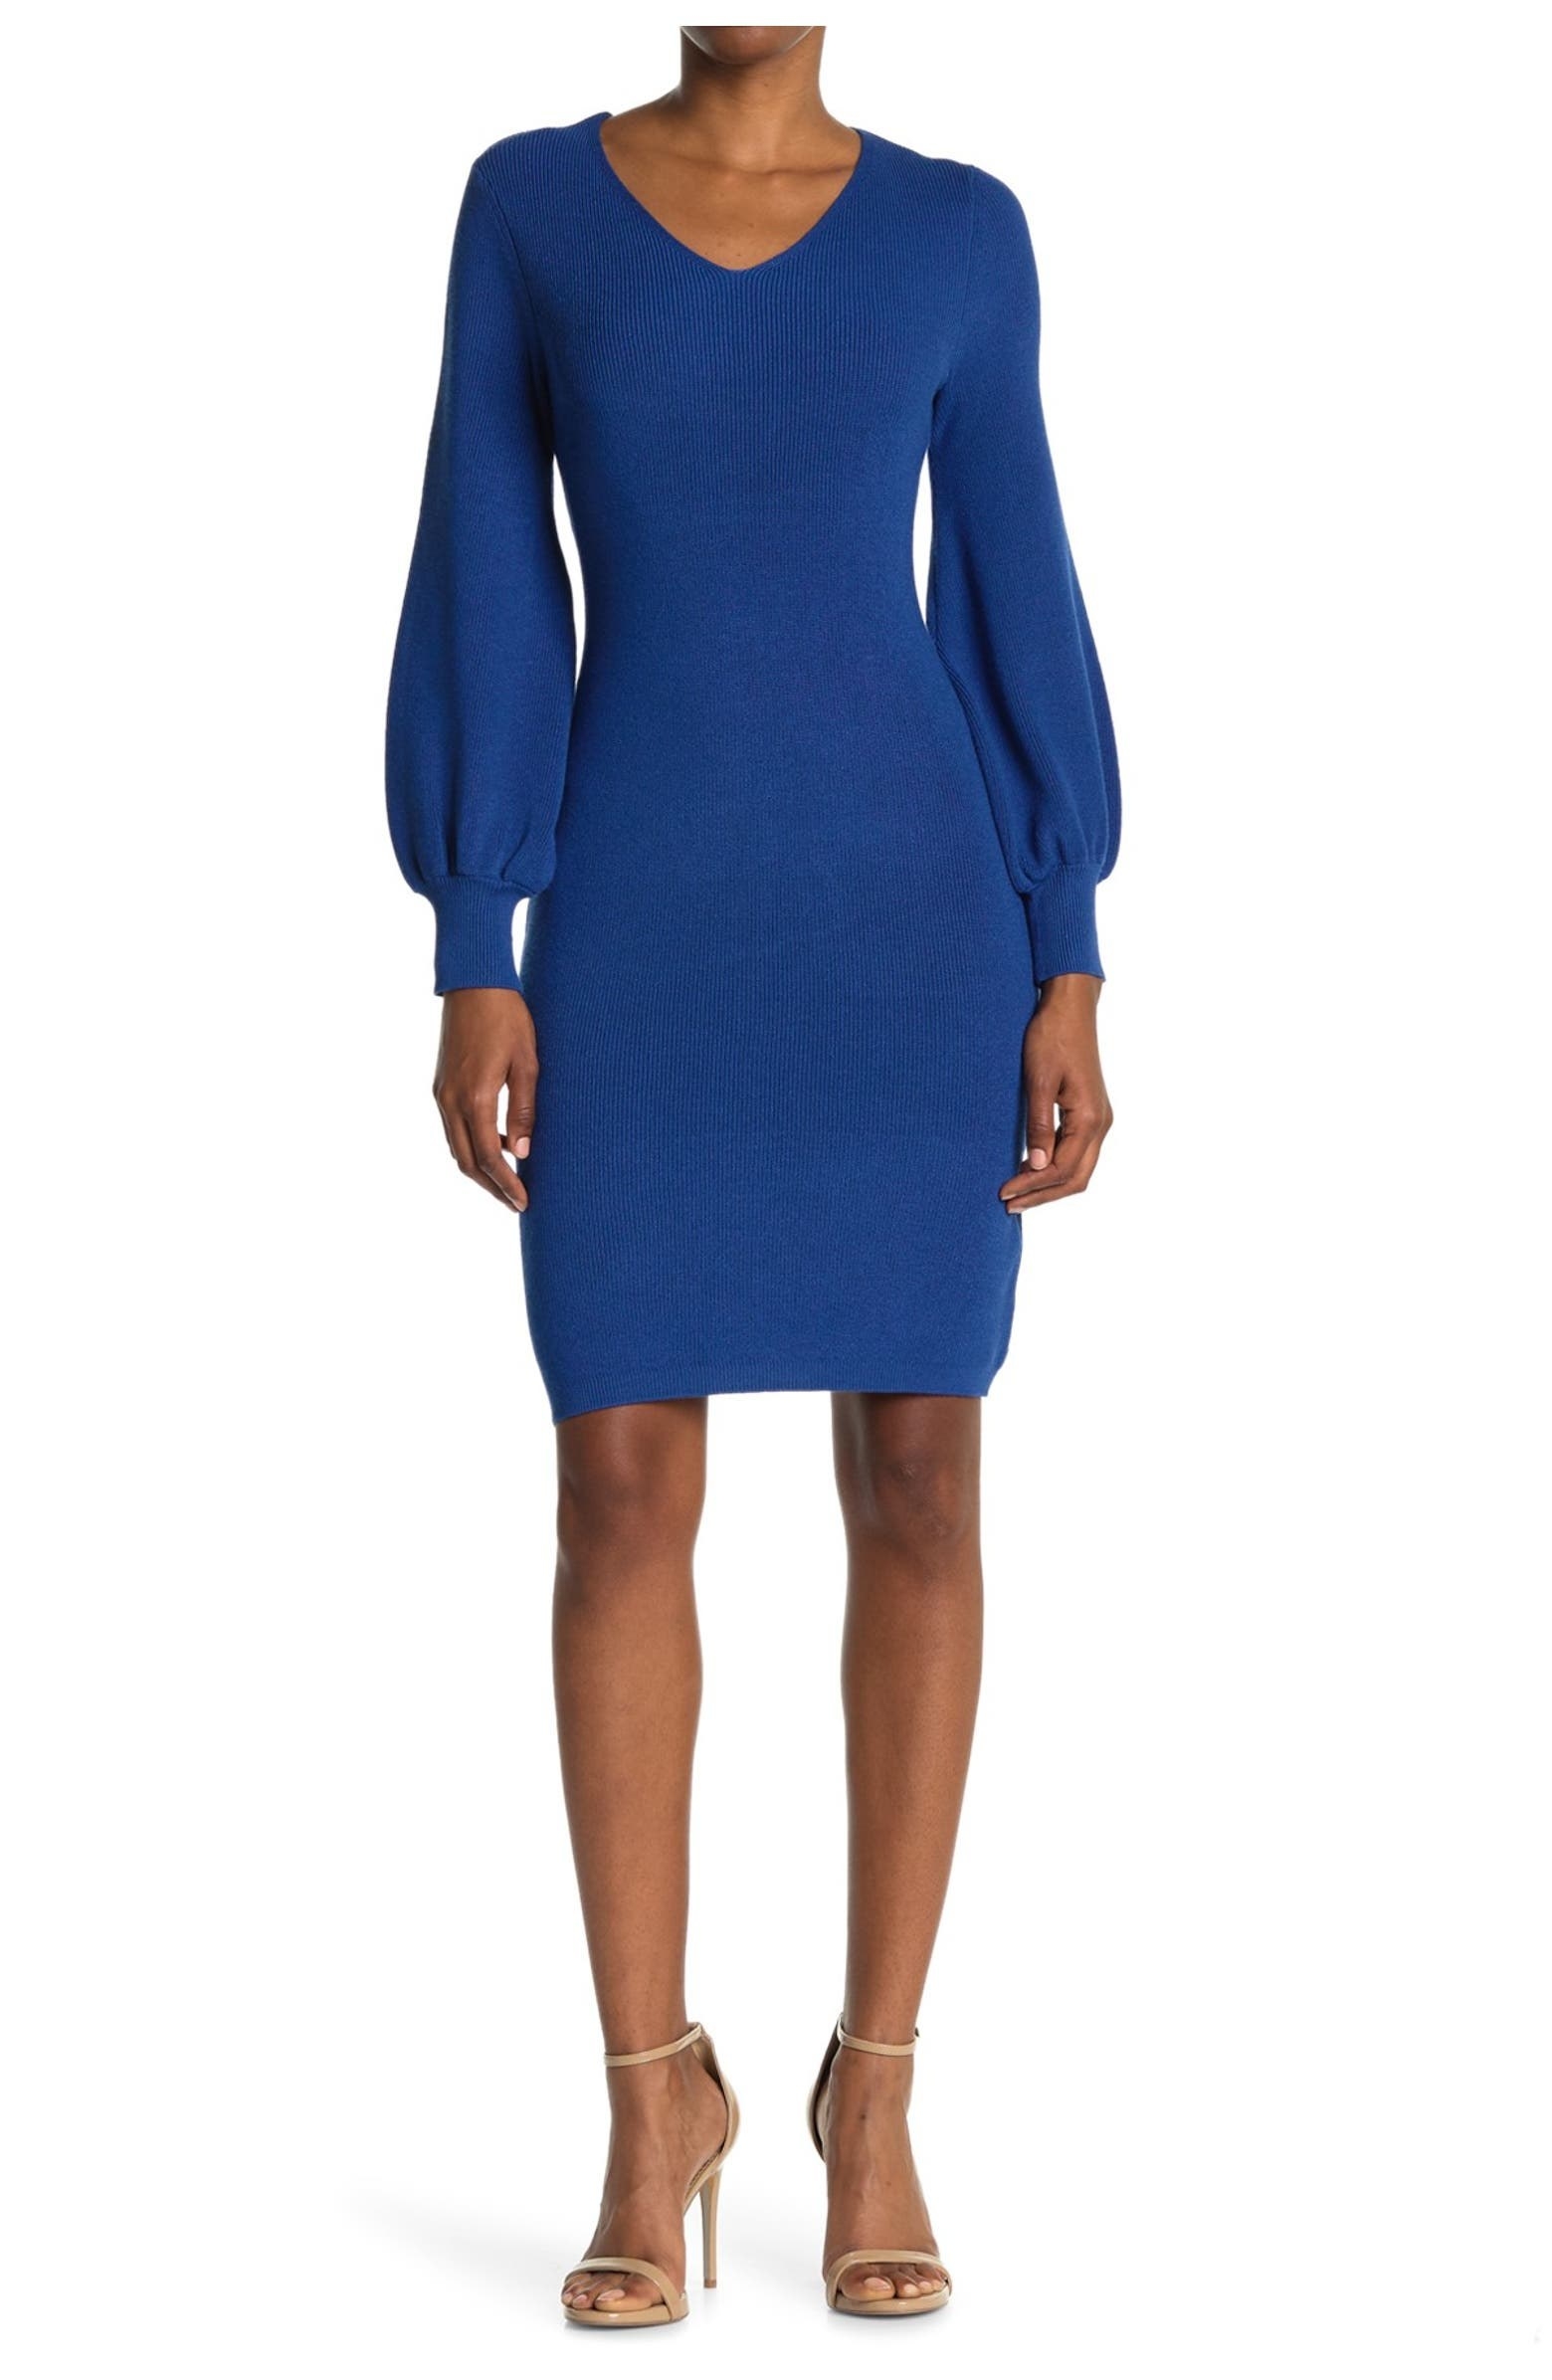 model in blue knee-length knit dress with a v-neck and long balloon sleeves